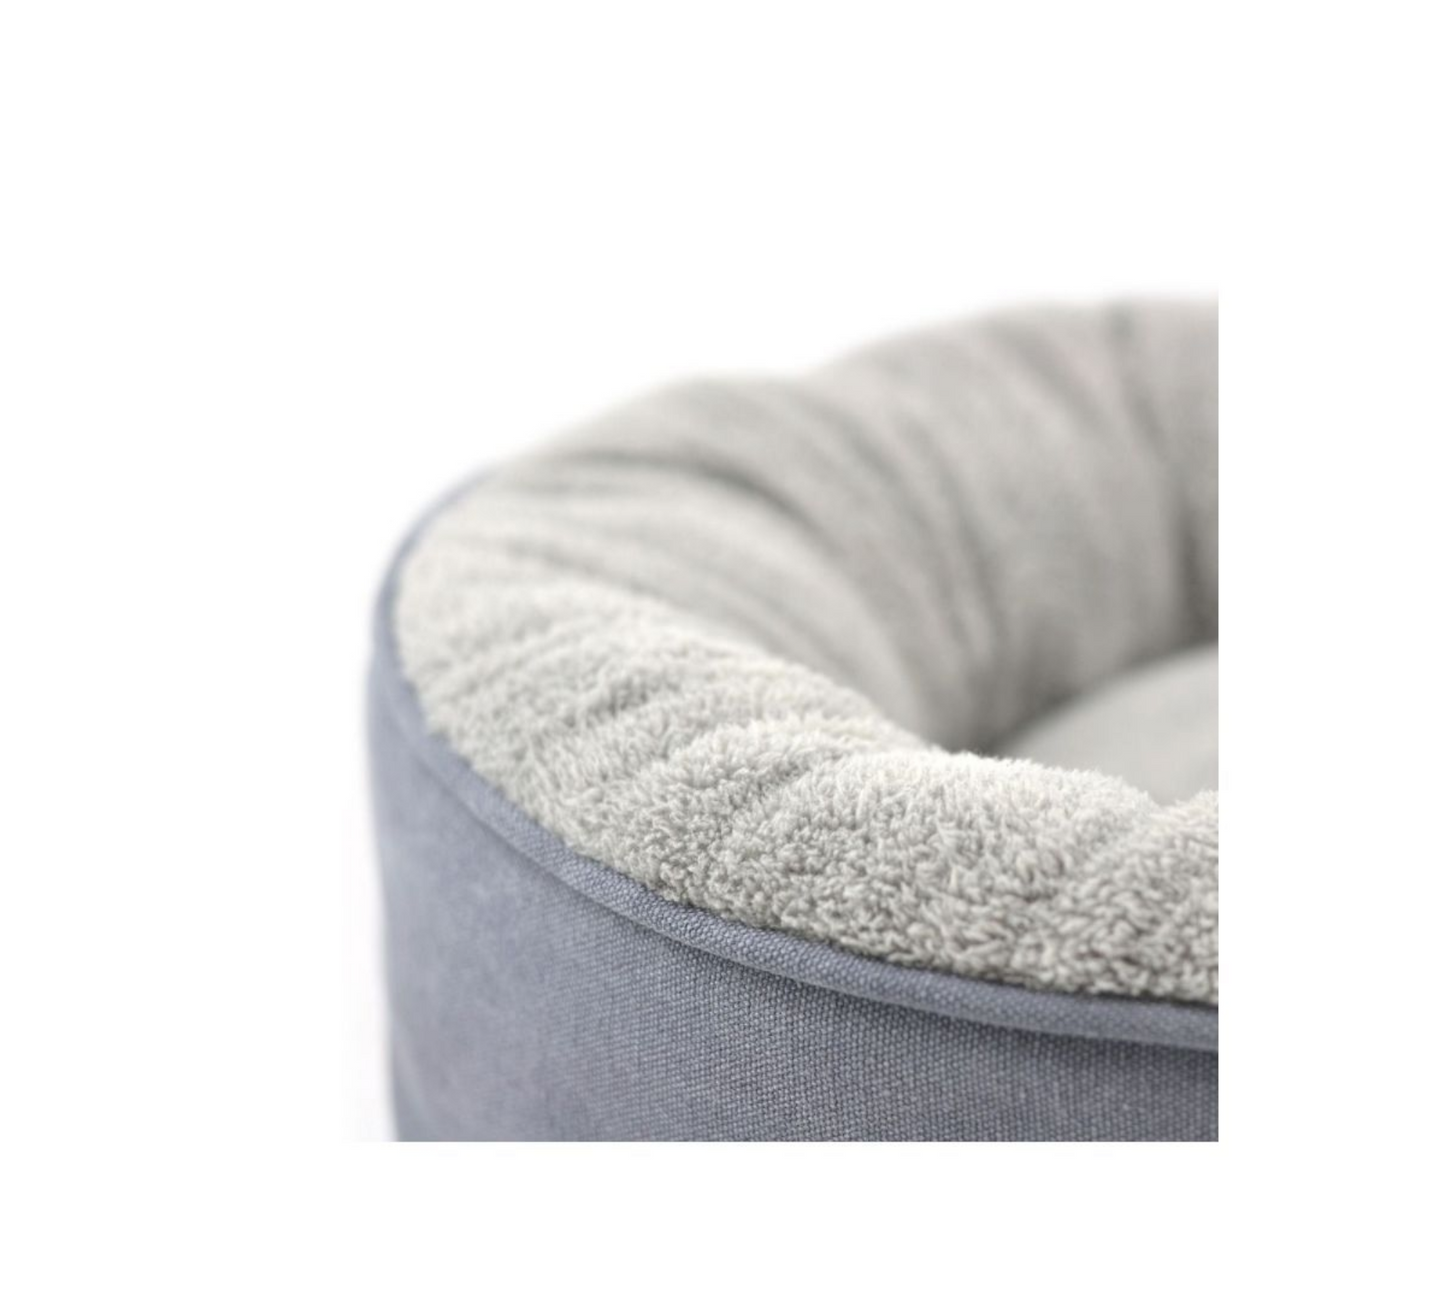 Canine's World Pillow Bed Tall Tails Dog Cat Donut Bed Charcoal, Tall Tails